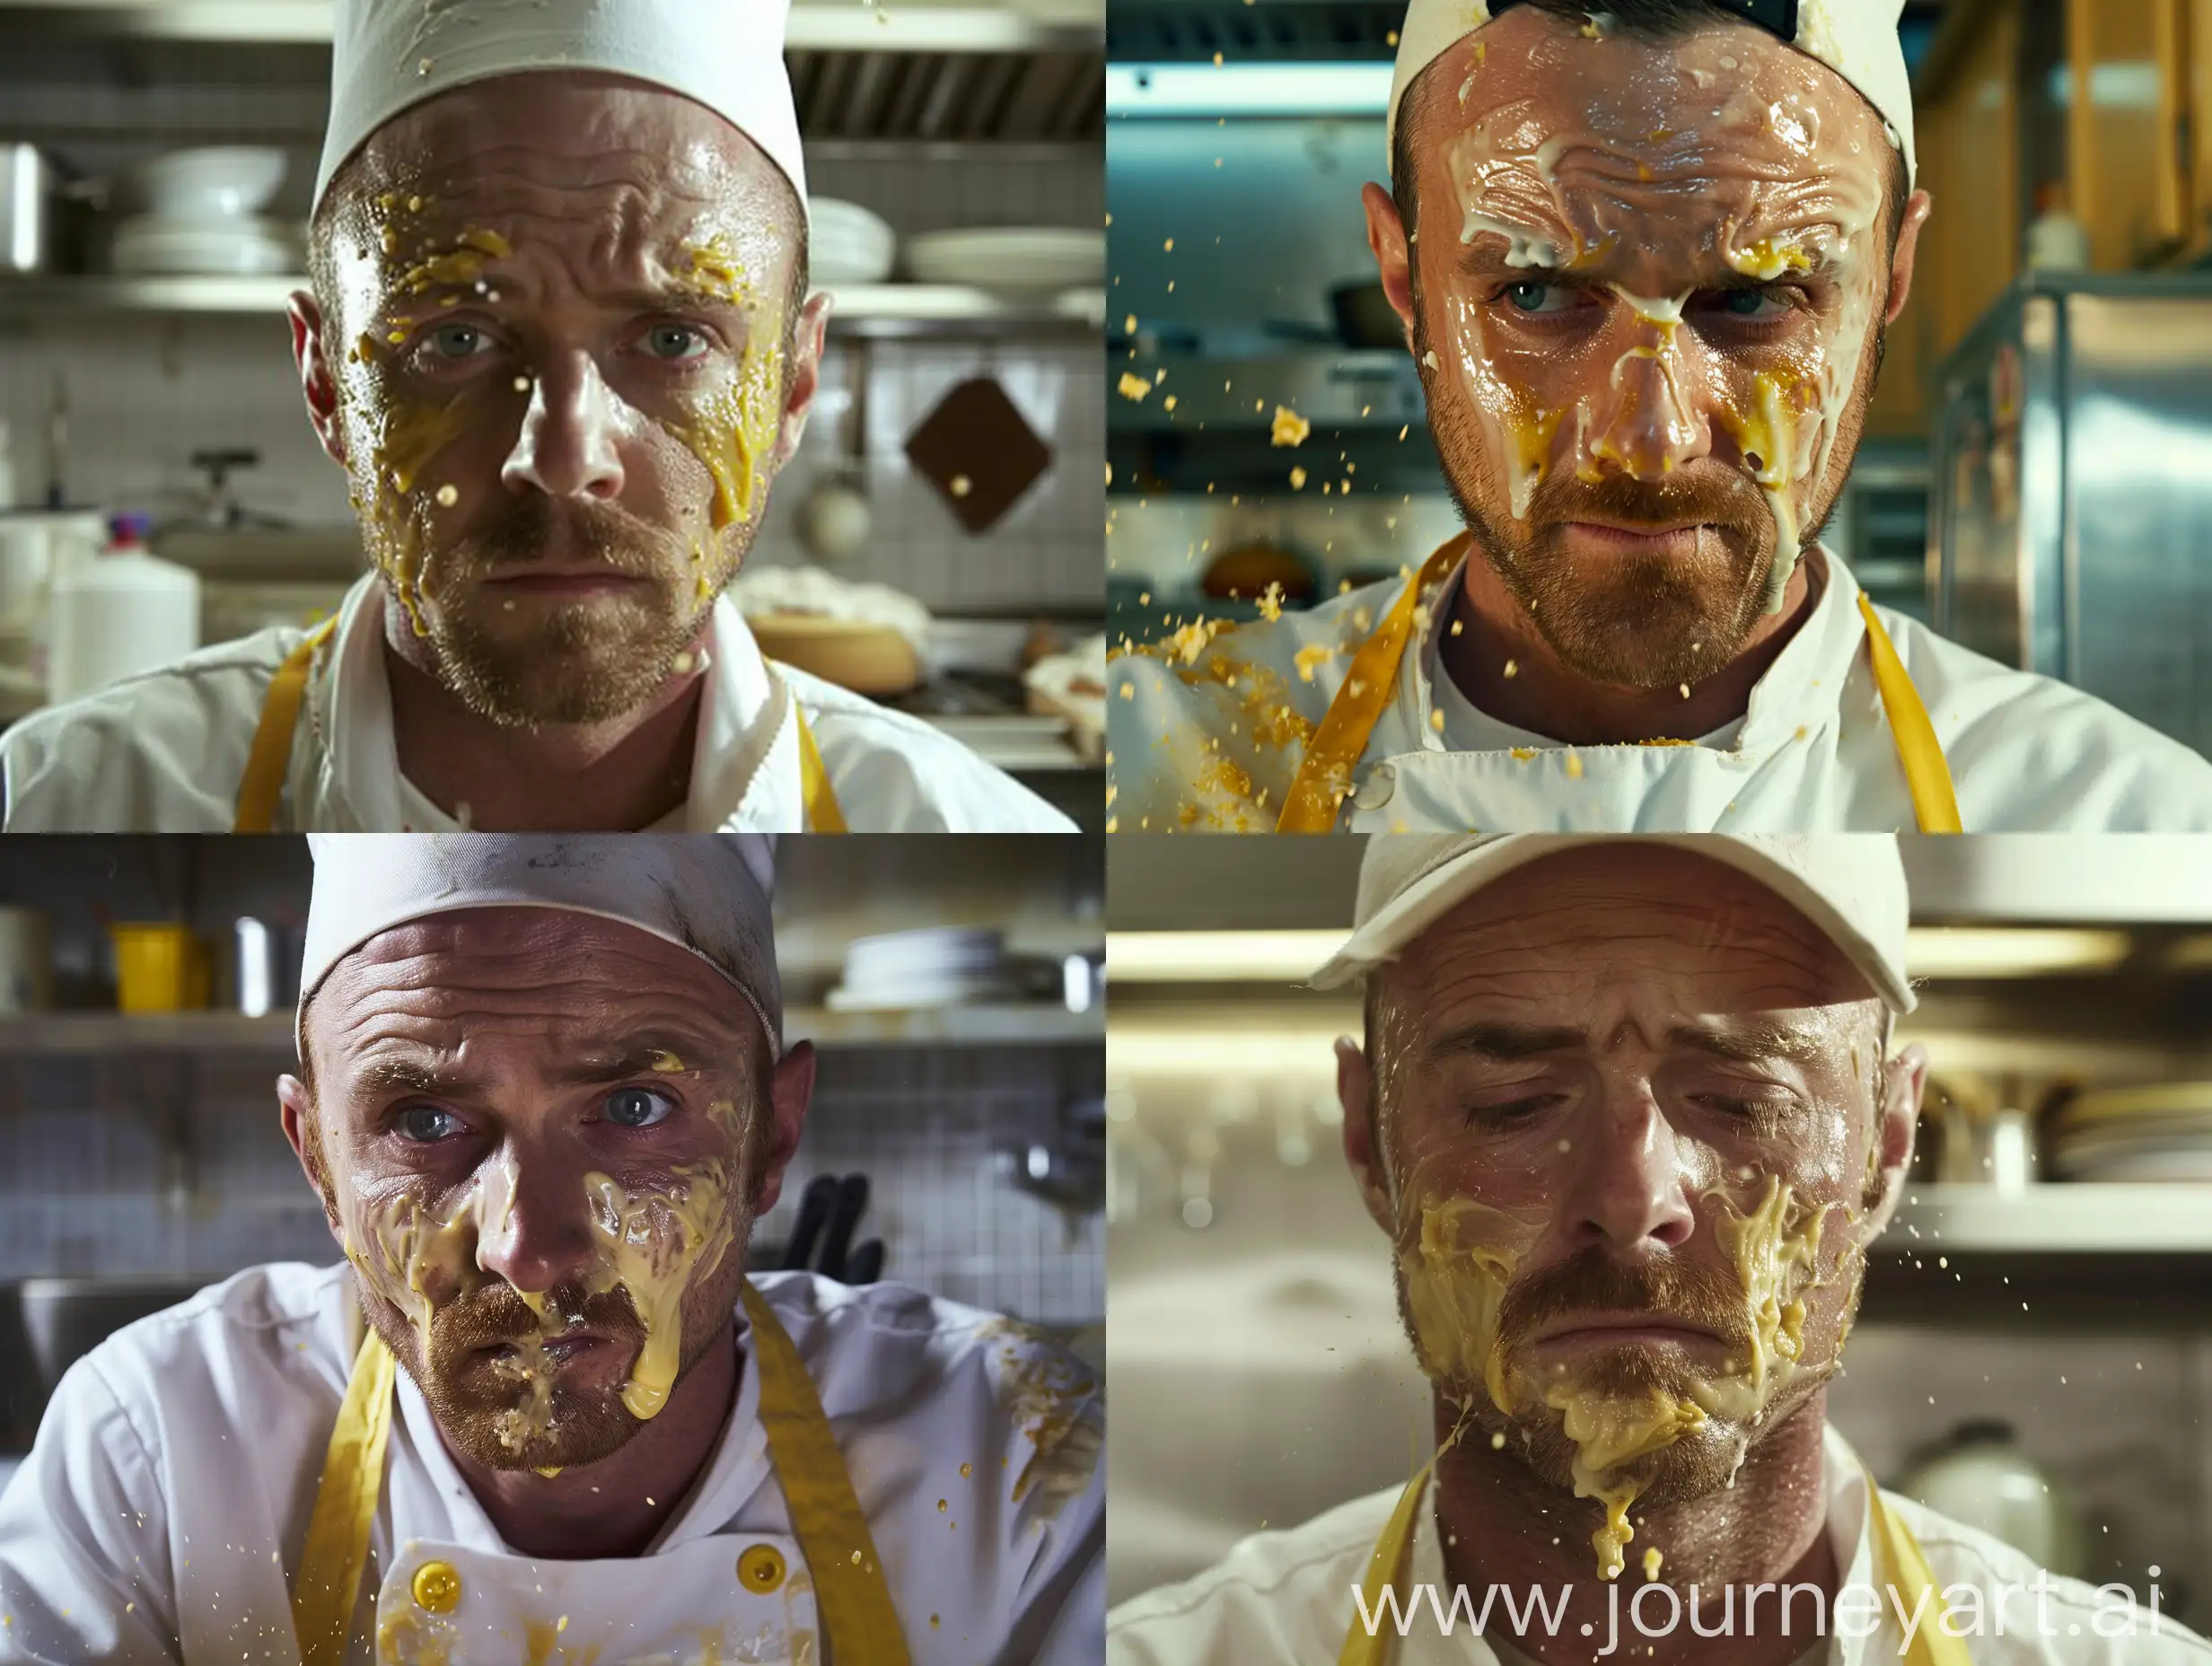 Jesse Pinkman (played by Aaron Paul) in Breaking Bad, Jesse Pinkman (played by Aaron Paul) is preparing the cake batter, but the cake ingredients are splashed on his face. Jesse Pinkman (played by Aaron Paul) is wearing a white kitchen uniform, he has a cooking hat, Jesse Pinkman (played by Aaron Paul) is wearing a yellow kitchen apron. Jesse Pinkman (played by Aaron Paul) looks sadly at the camera, the background is the kitchen, the camera is further back, the lighting is modern, realistic, realistic, q2